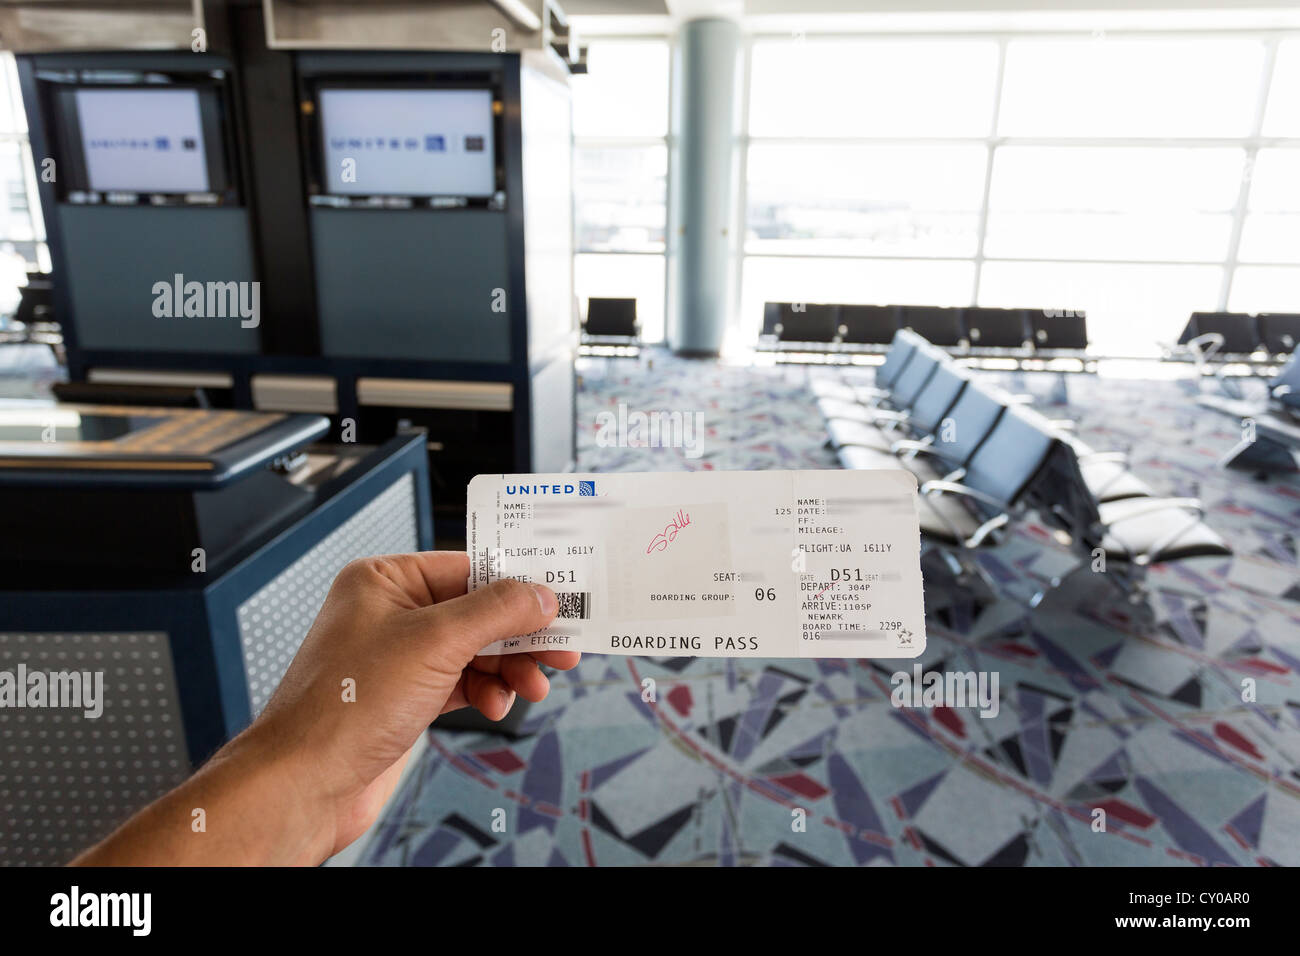 Hand holding a boarding pass. Airport gate in the background. Stock Photo